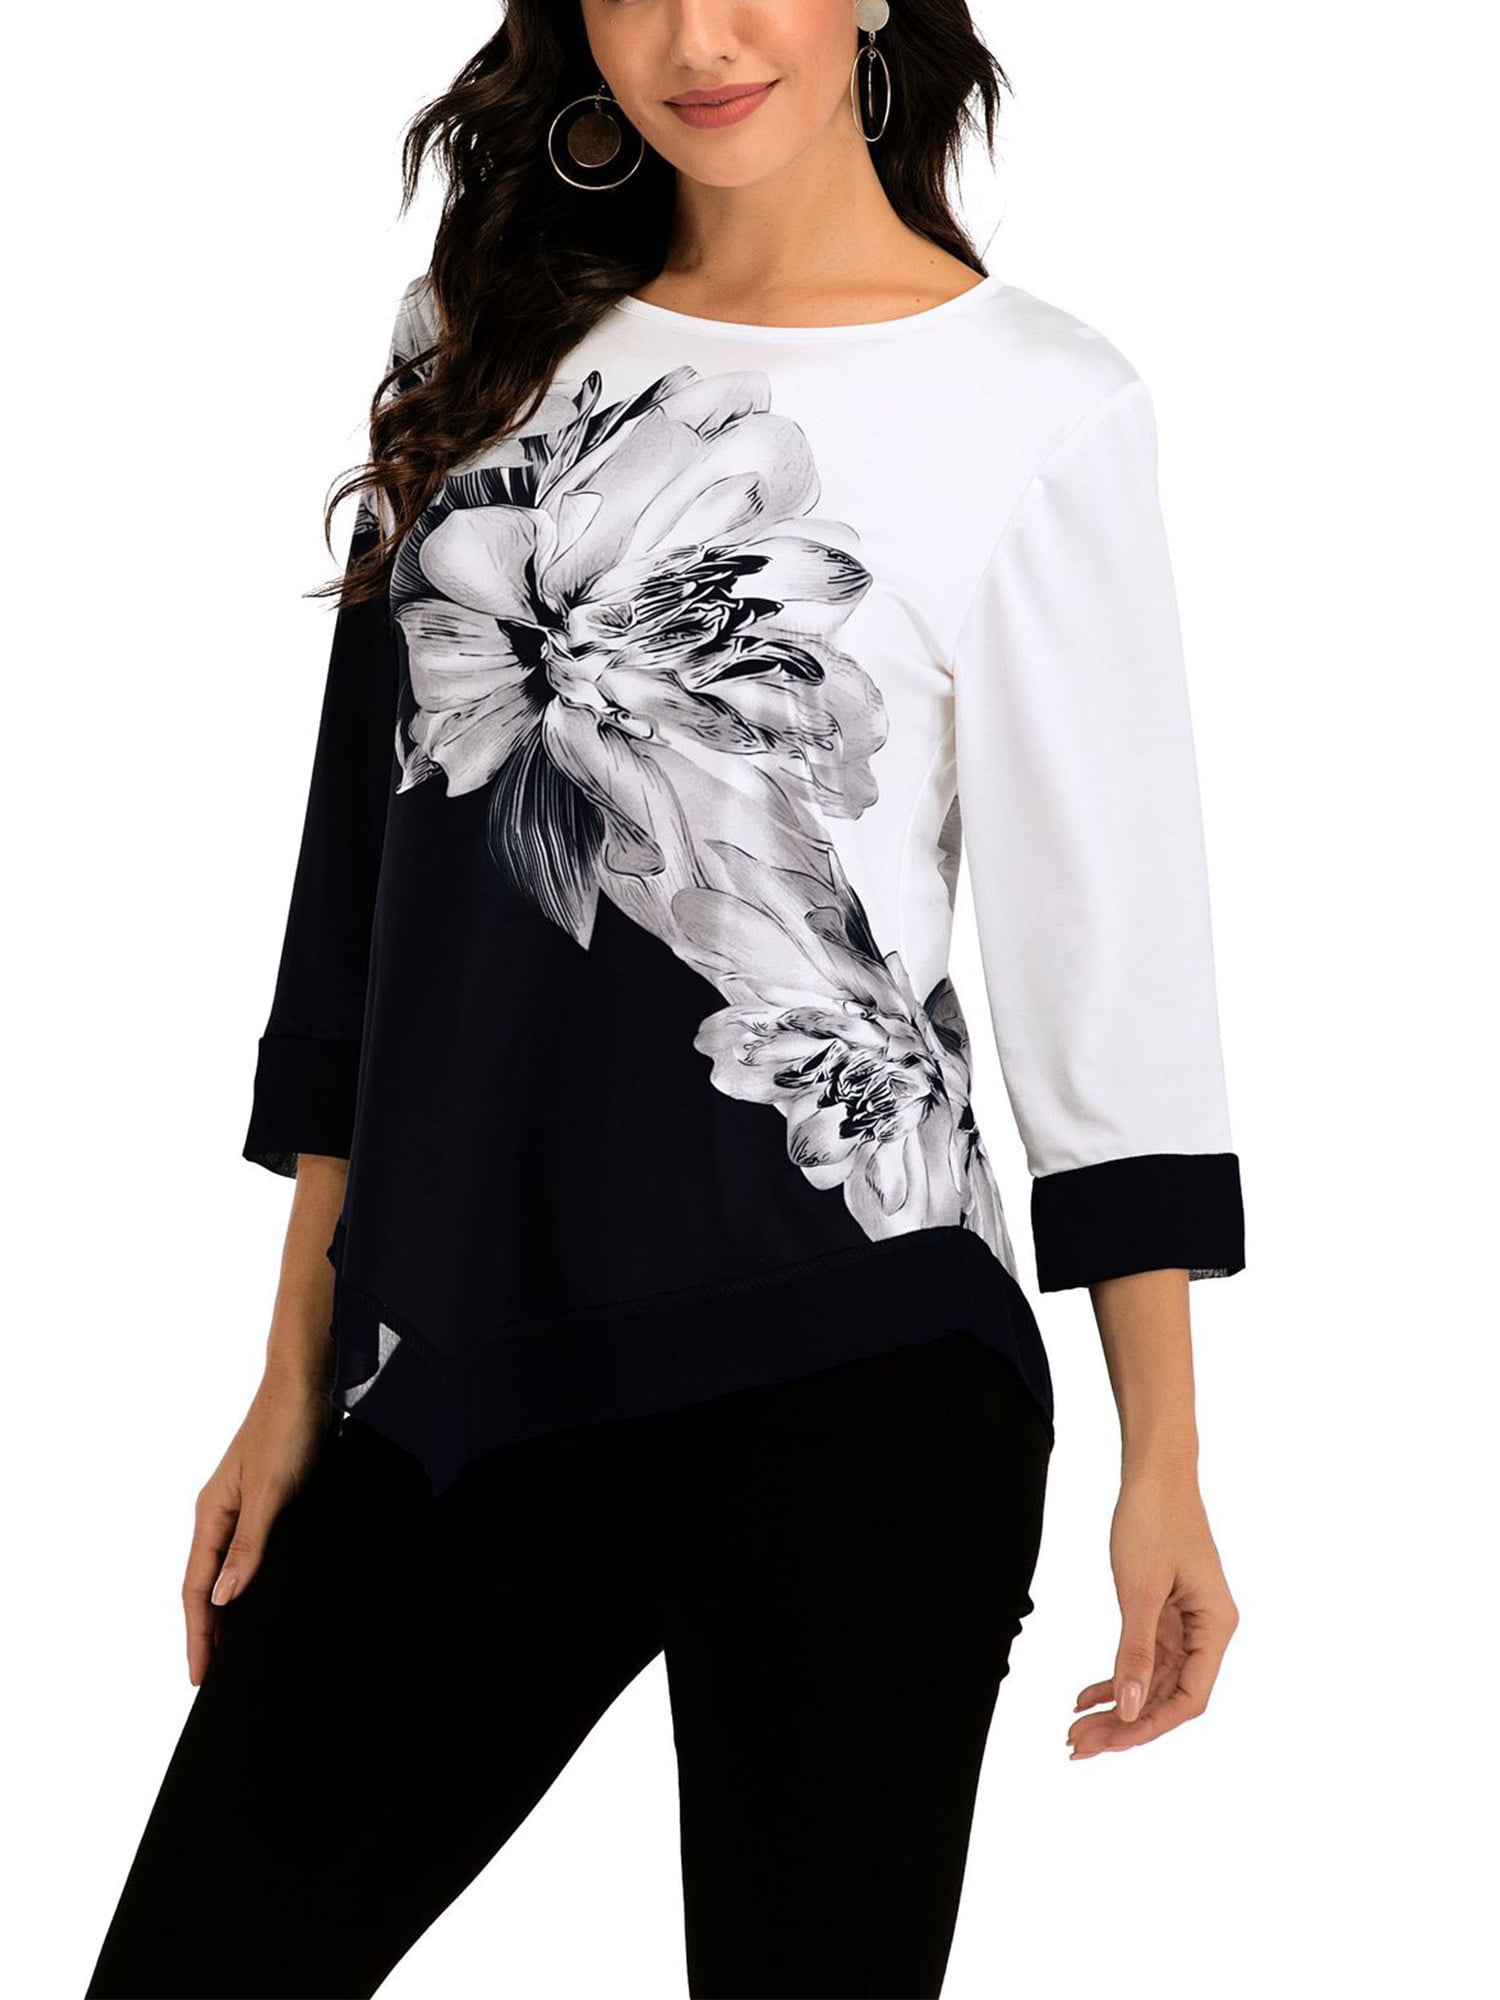 Women 3/4 Sleeve Casual Round Neck Loose Oversize Blouse Shirt Tops Oversize Top